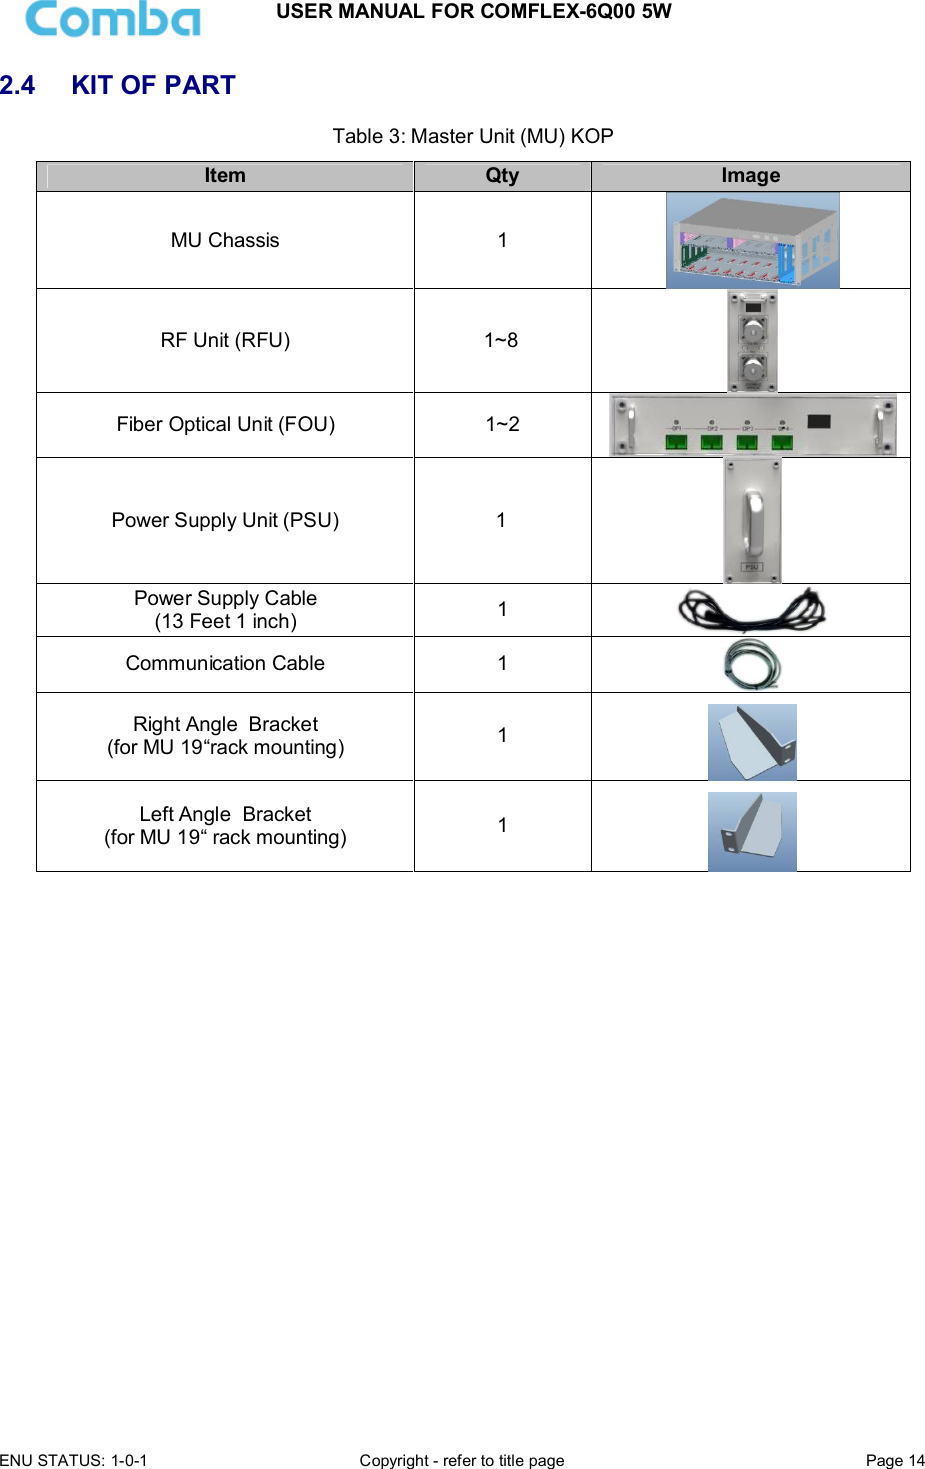 USER MANUAL FOR COMFLEX-6Q00 5W ENU STATUS: 1-0-1  Copyright - refer to title page  Page 14  2.4  KIT OF PART Table 3: Master Unit (MU) KOP Item  Qty  Image MU Chassis  1  RF Unit (RFU)  1~8  Fiber Optical Unit (FOU)  1~2  Power Supply Unit (PSU)  1  Power Supply Cable (13 Feet 1 inch)  1  Communication Cable  1  Right Angle  Bracket (for MU 19“rack mounting)  1   Left Angle  Bracket (for MU 19“ rack mounting)  1    